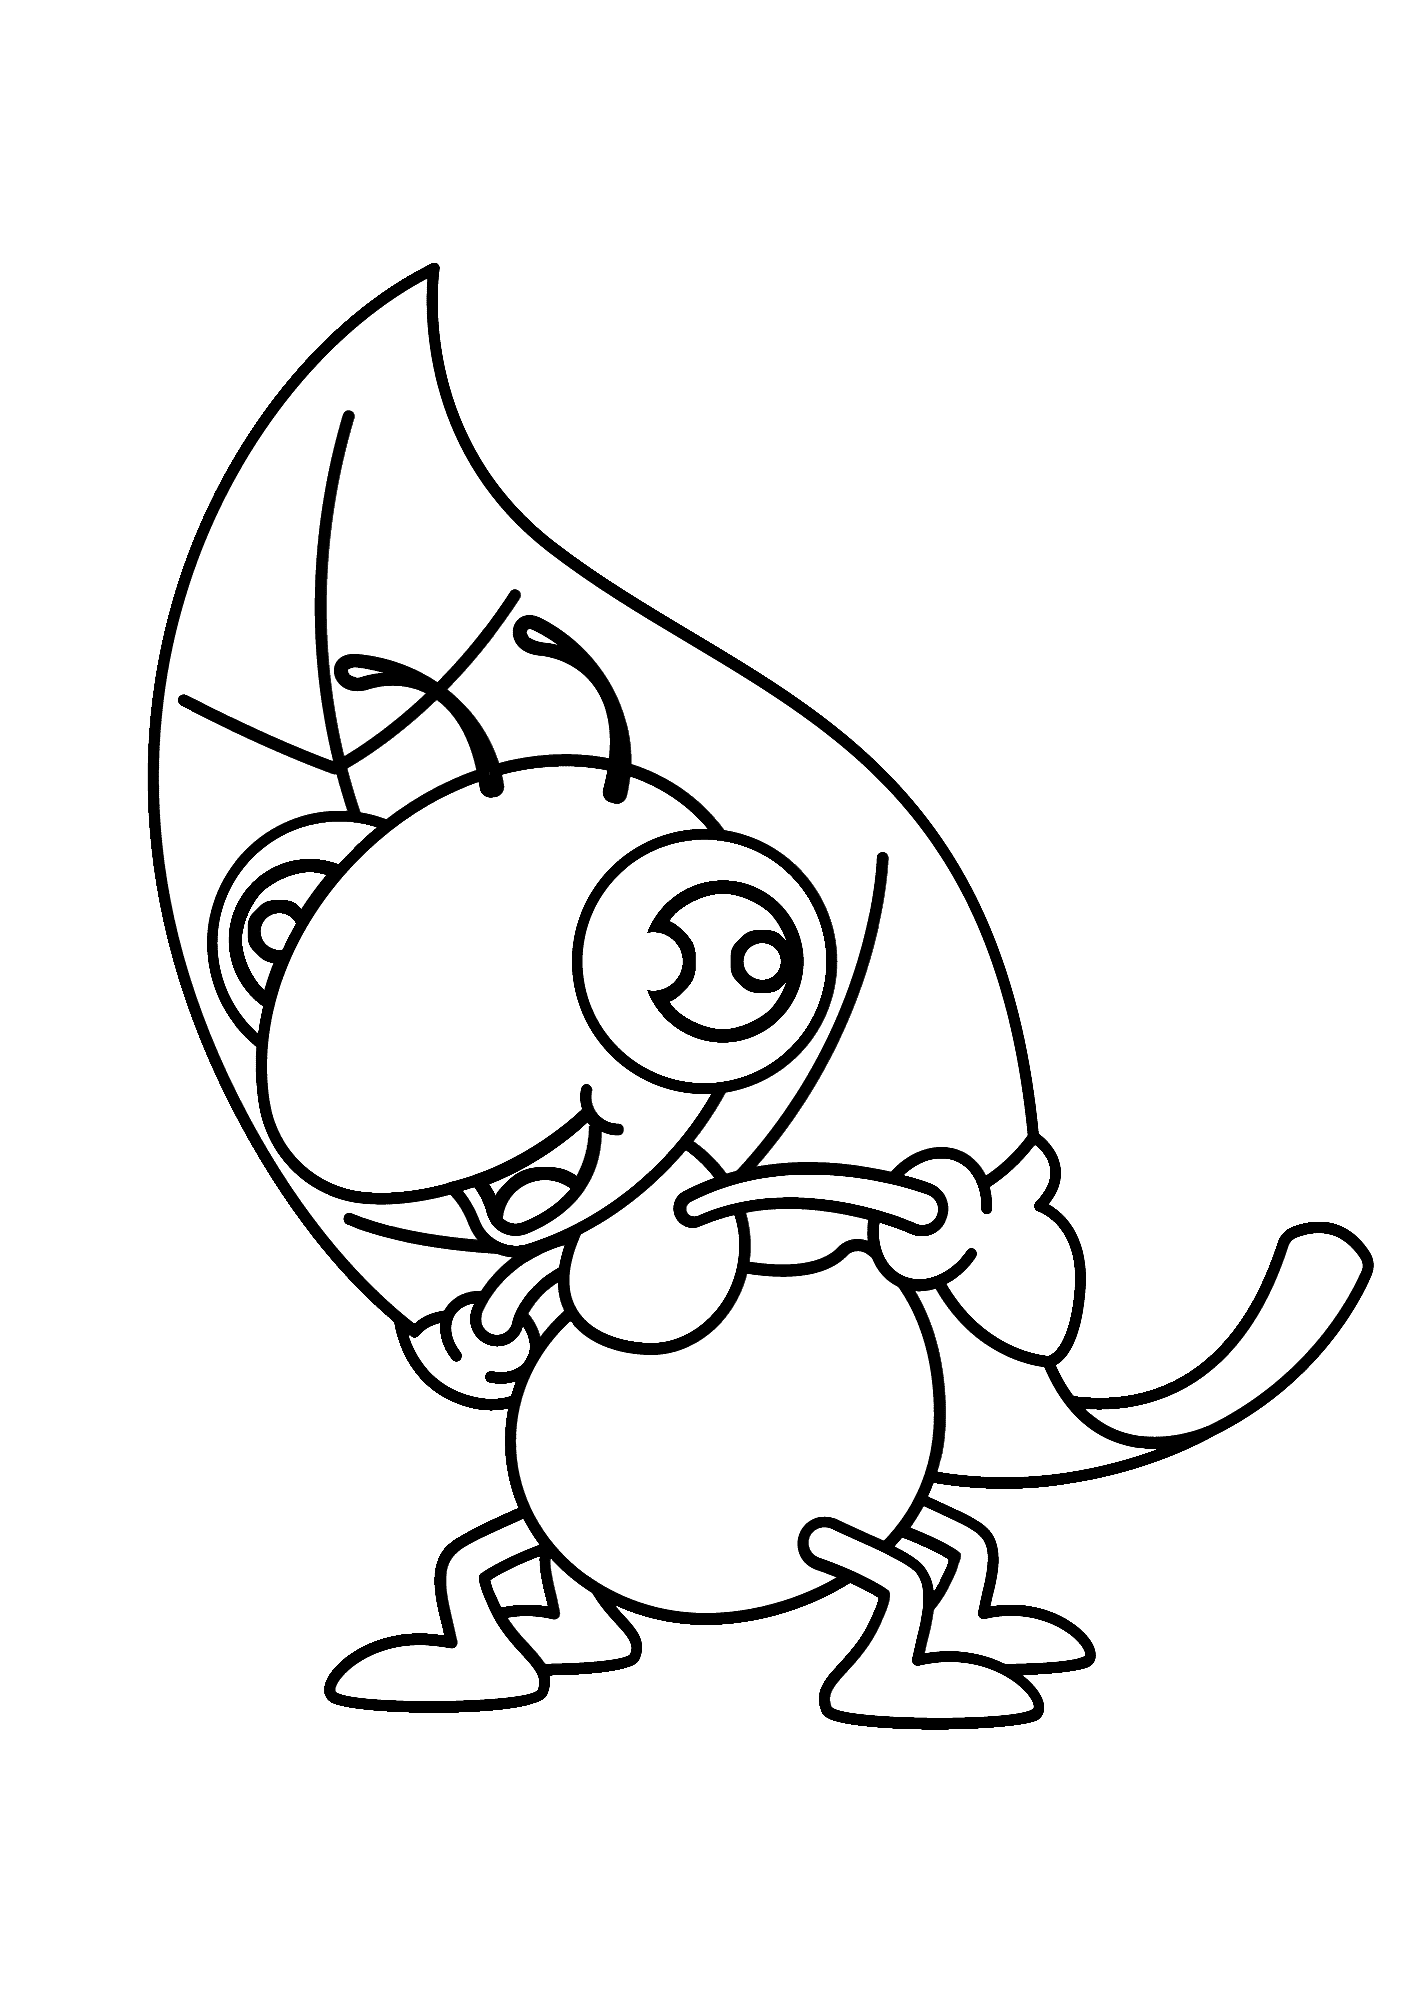 A Is For Ant Coloring Page